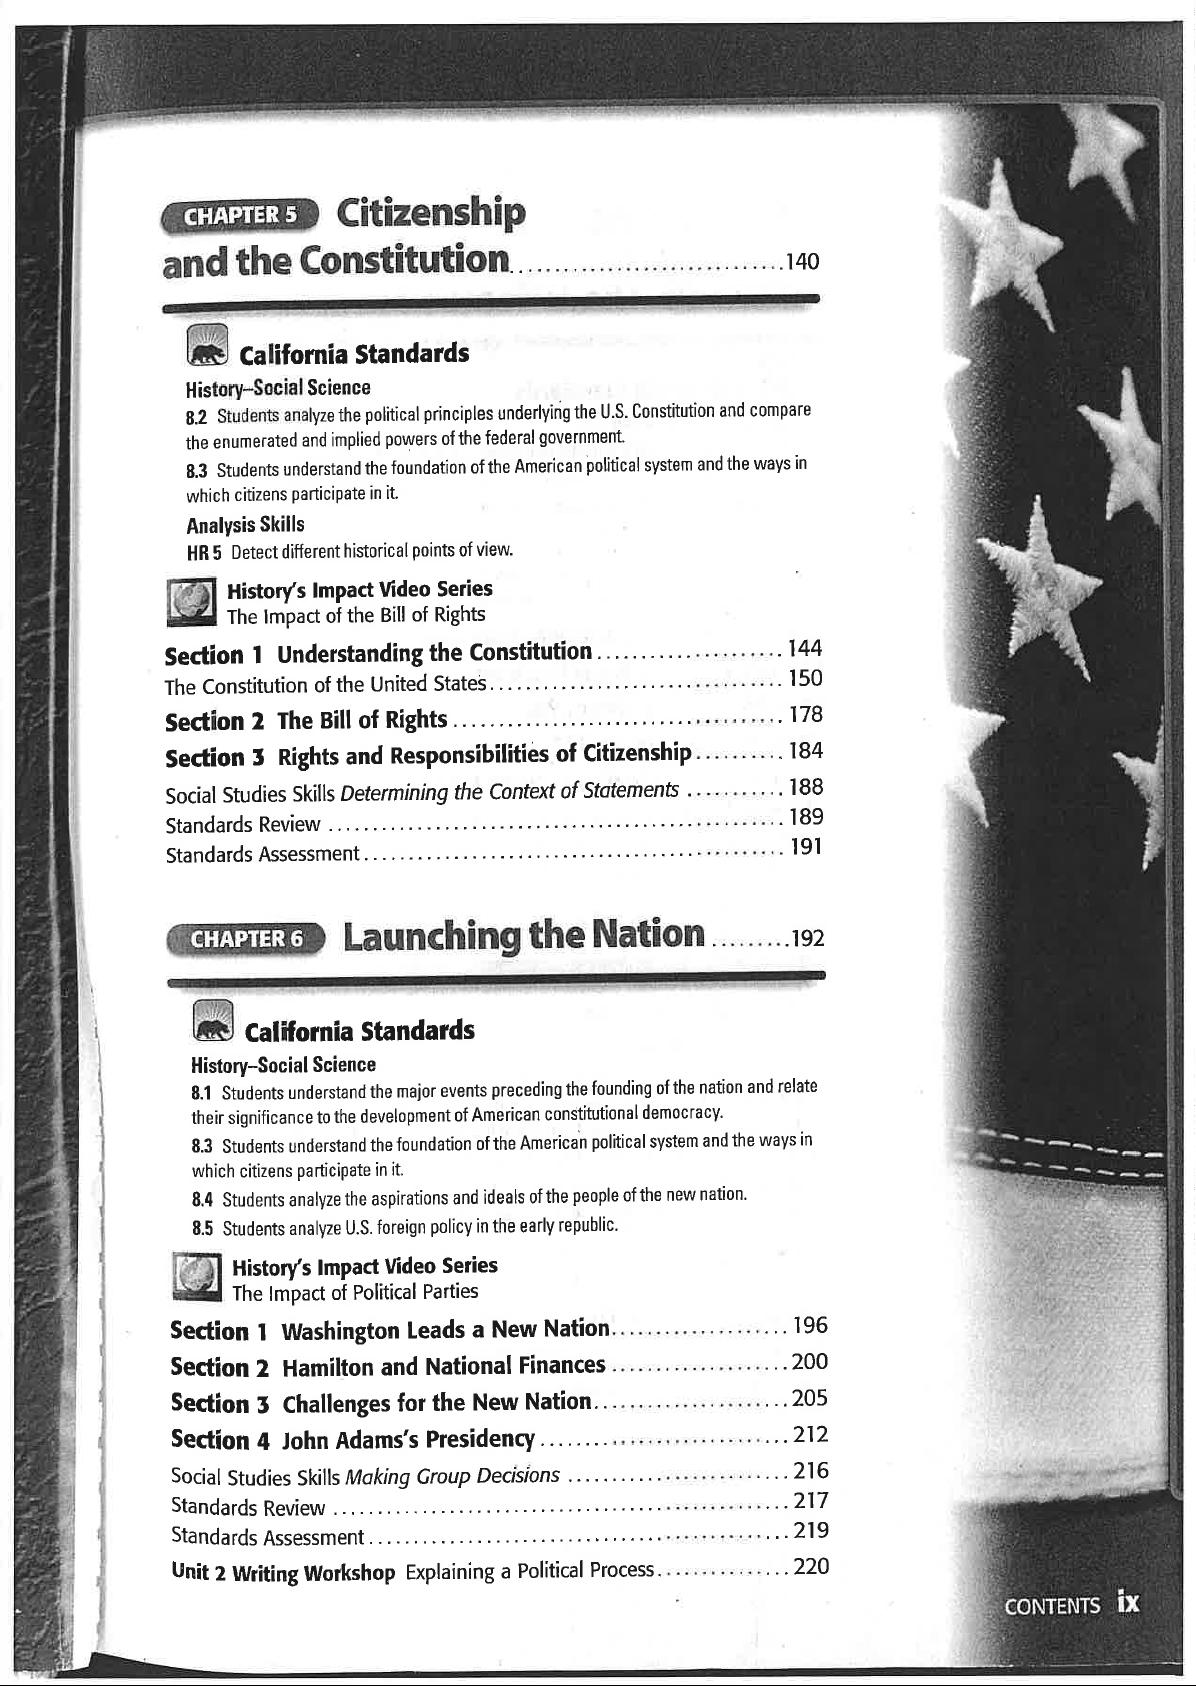 US_History_Textbook_8th_Grade_Table_of_Contents Image-1